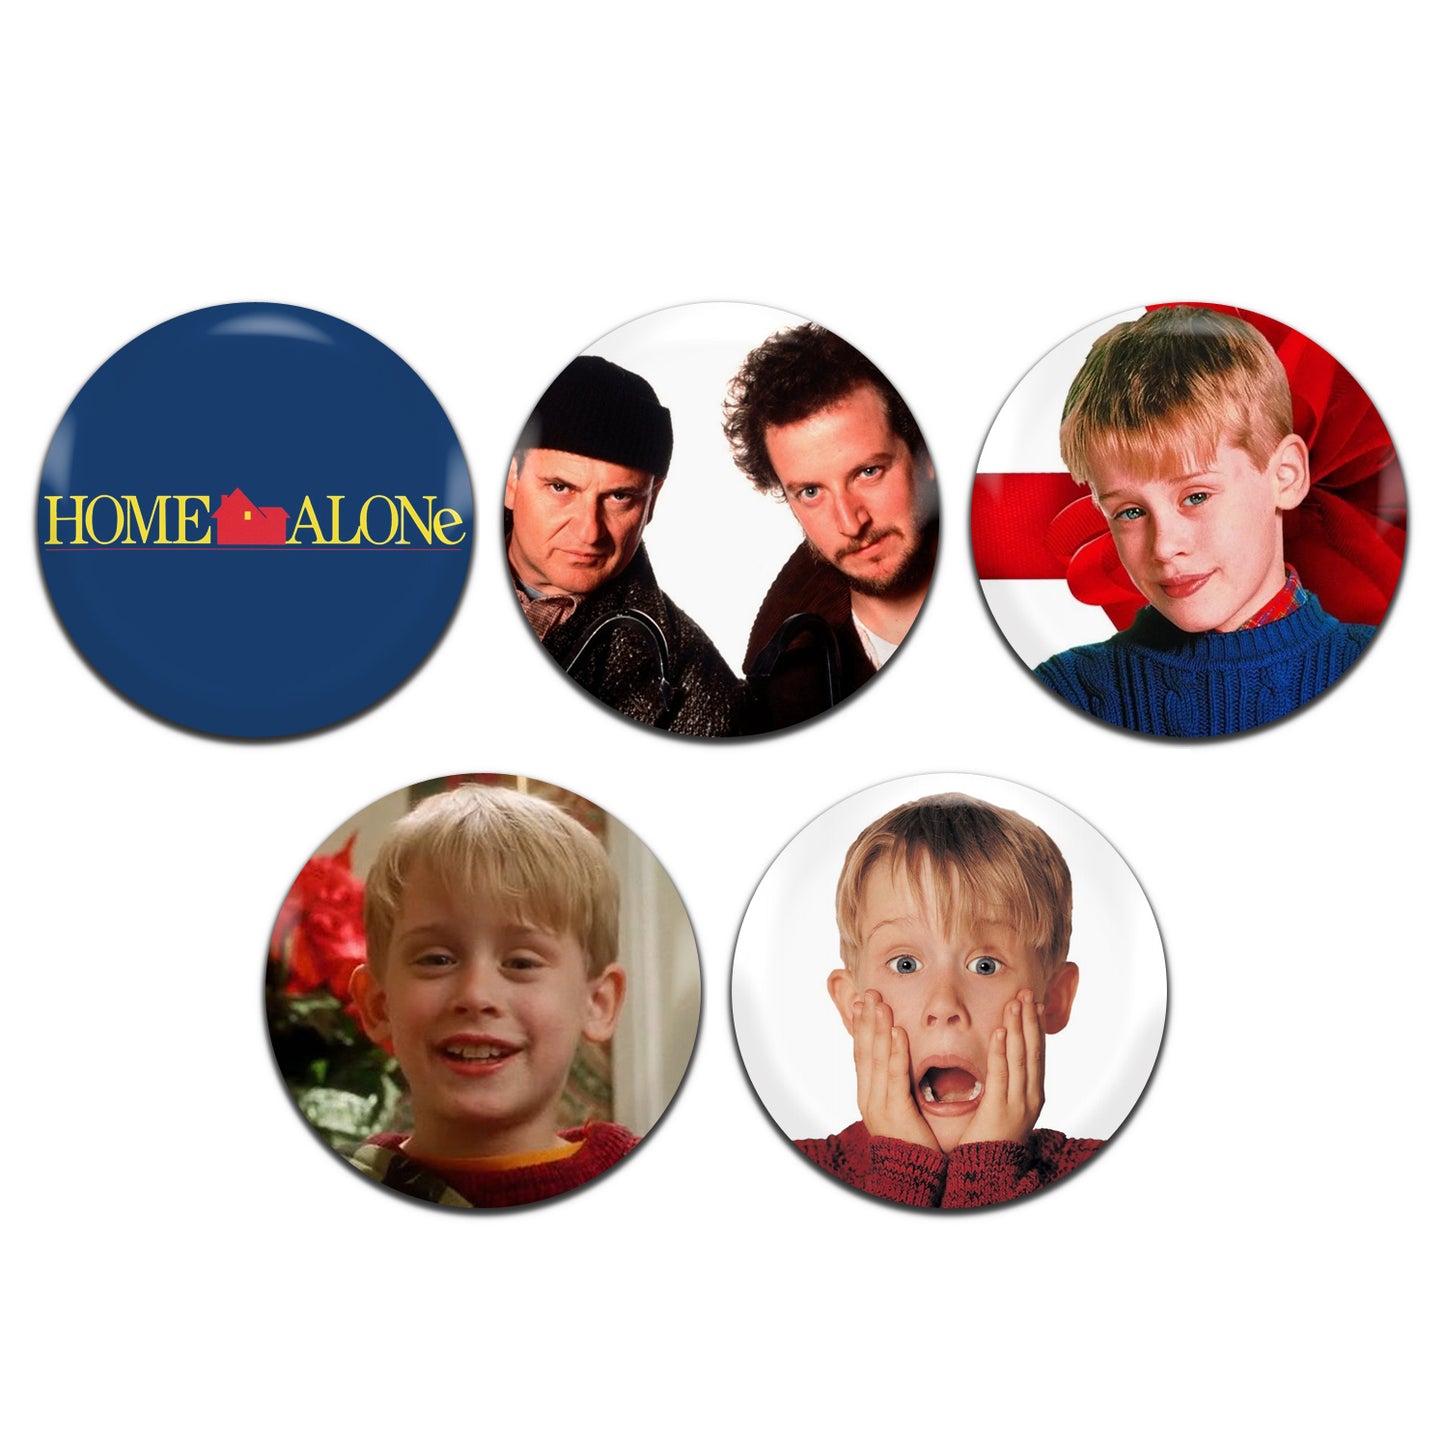 Home Alone Movie Christmas Film 90's 25mm / 1 Inch D-Pin Button Badges (5x Set)